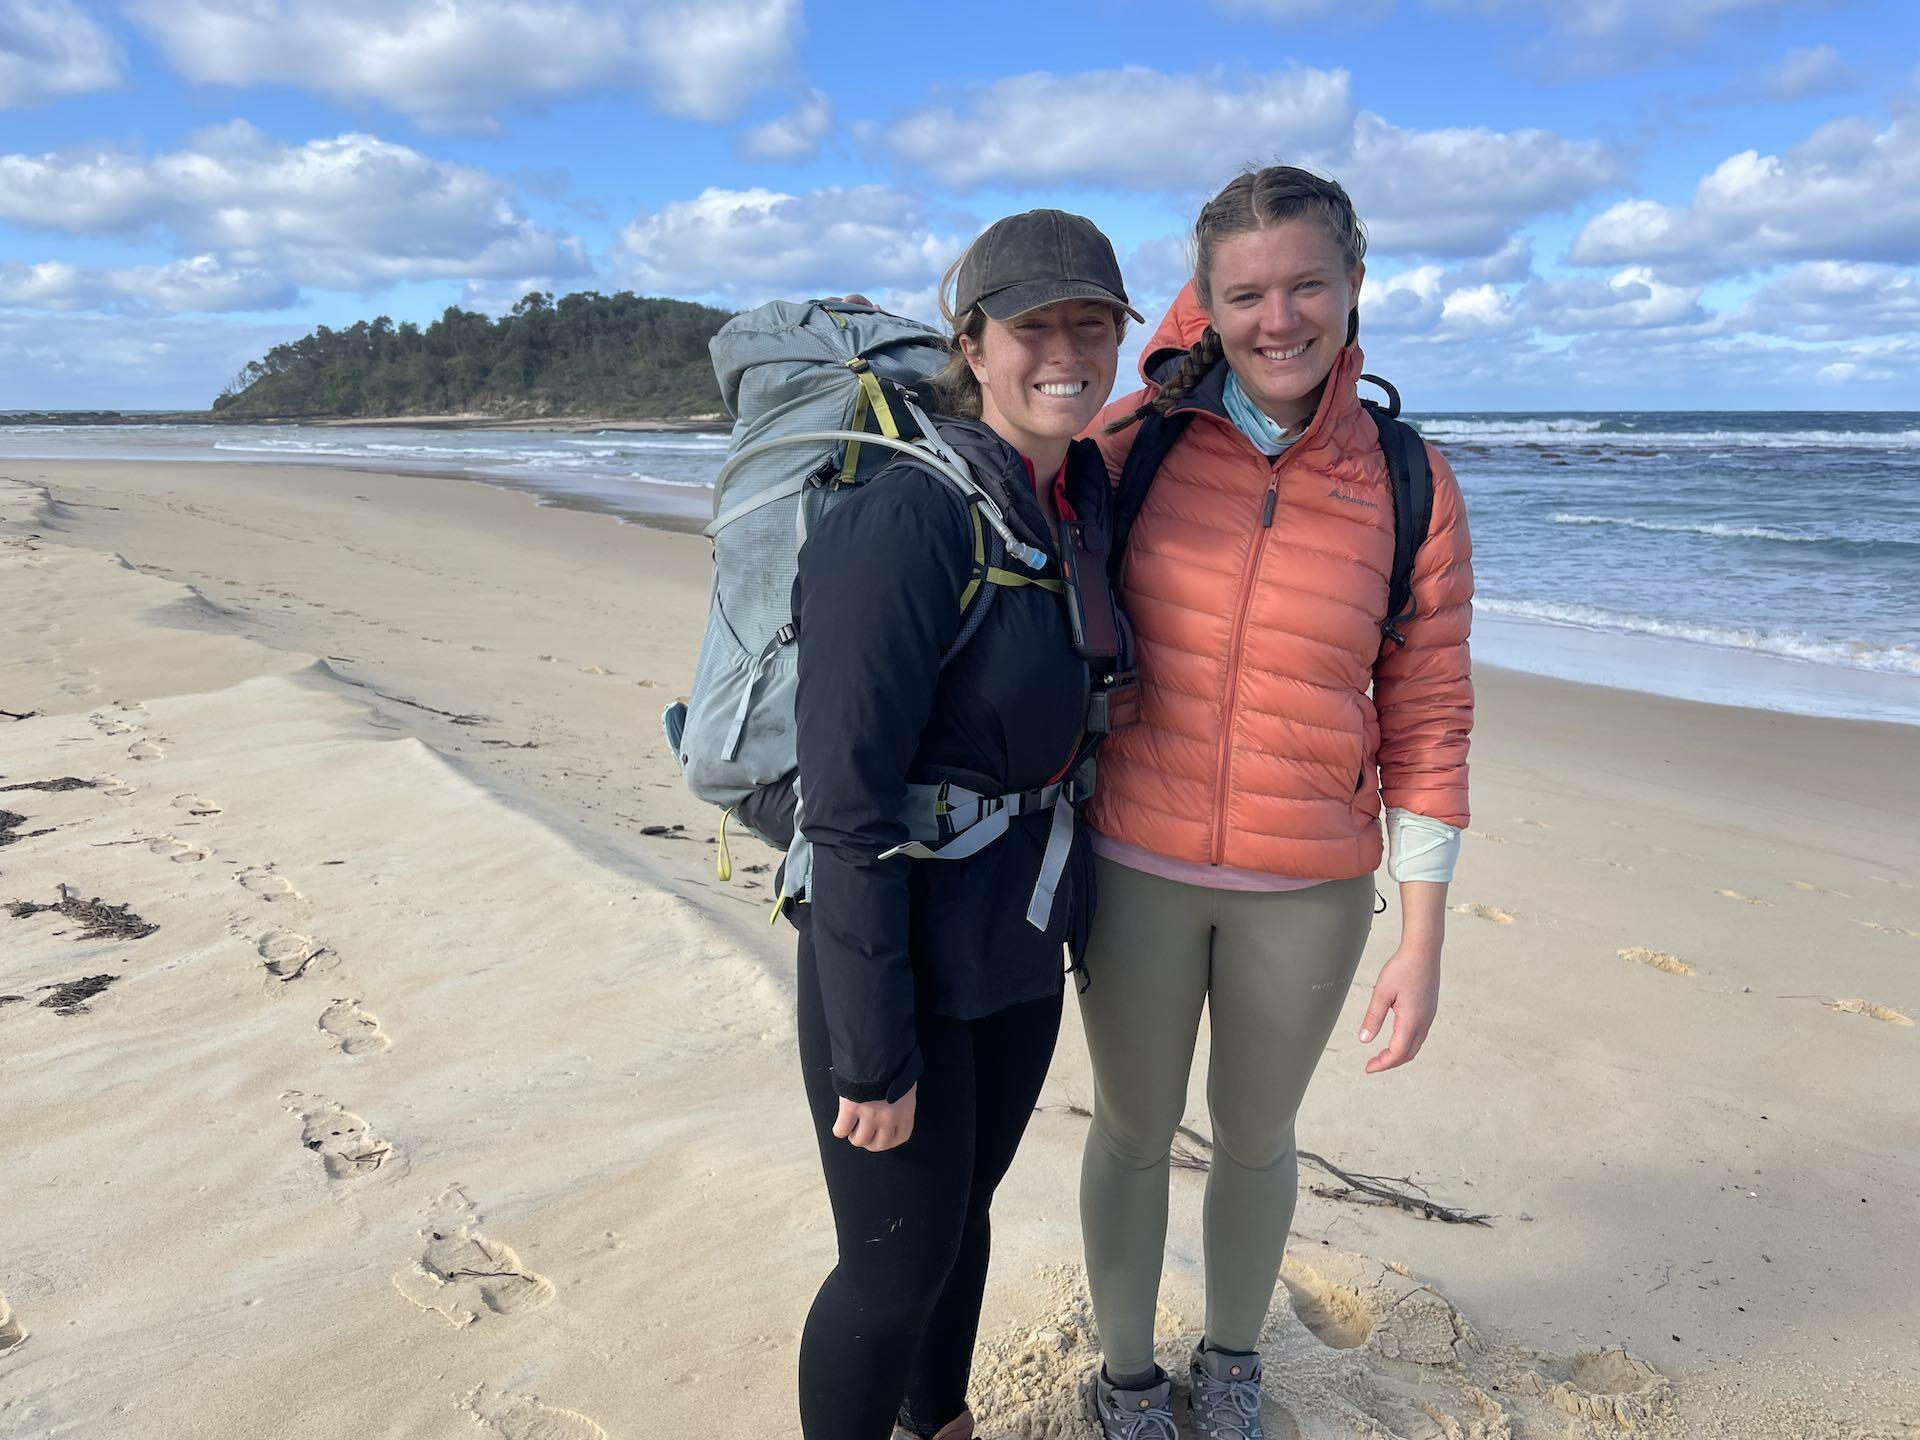 This Woman is Walking The Length of Australia’s East Coast – So We Joined Her For a Day,Eva Davis-Boermans, people, beach, beach hiking